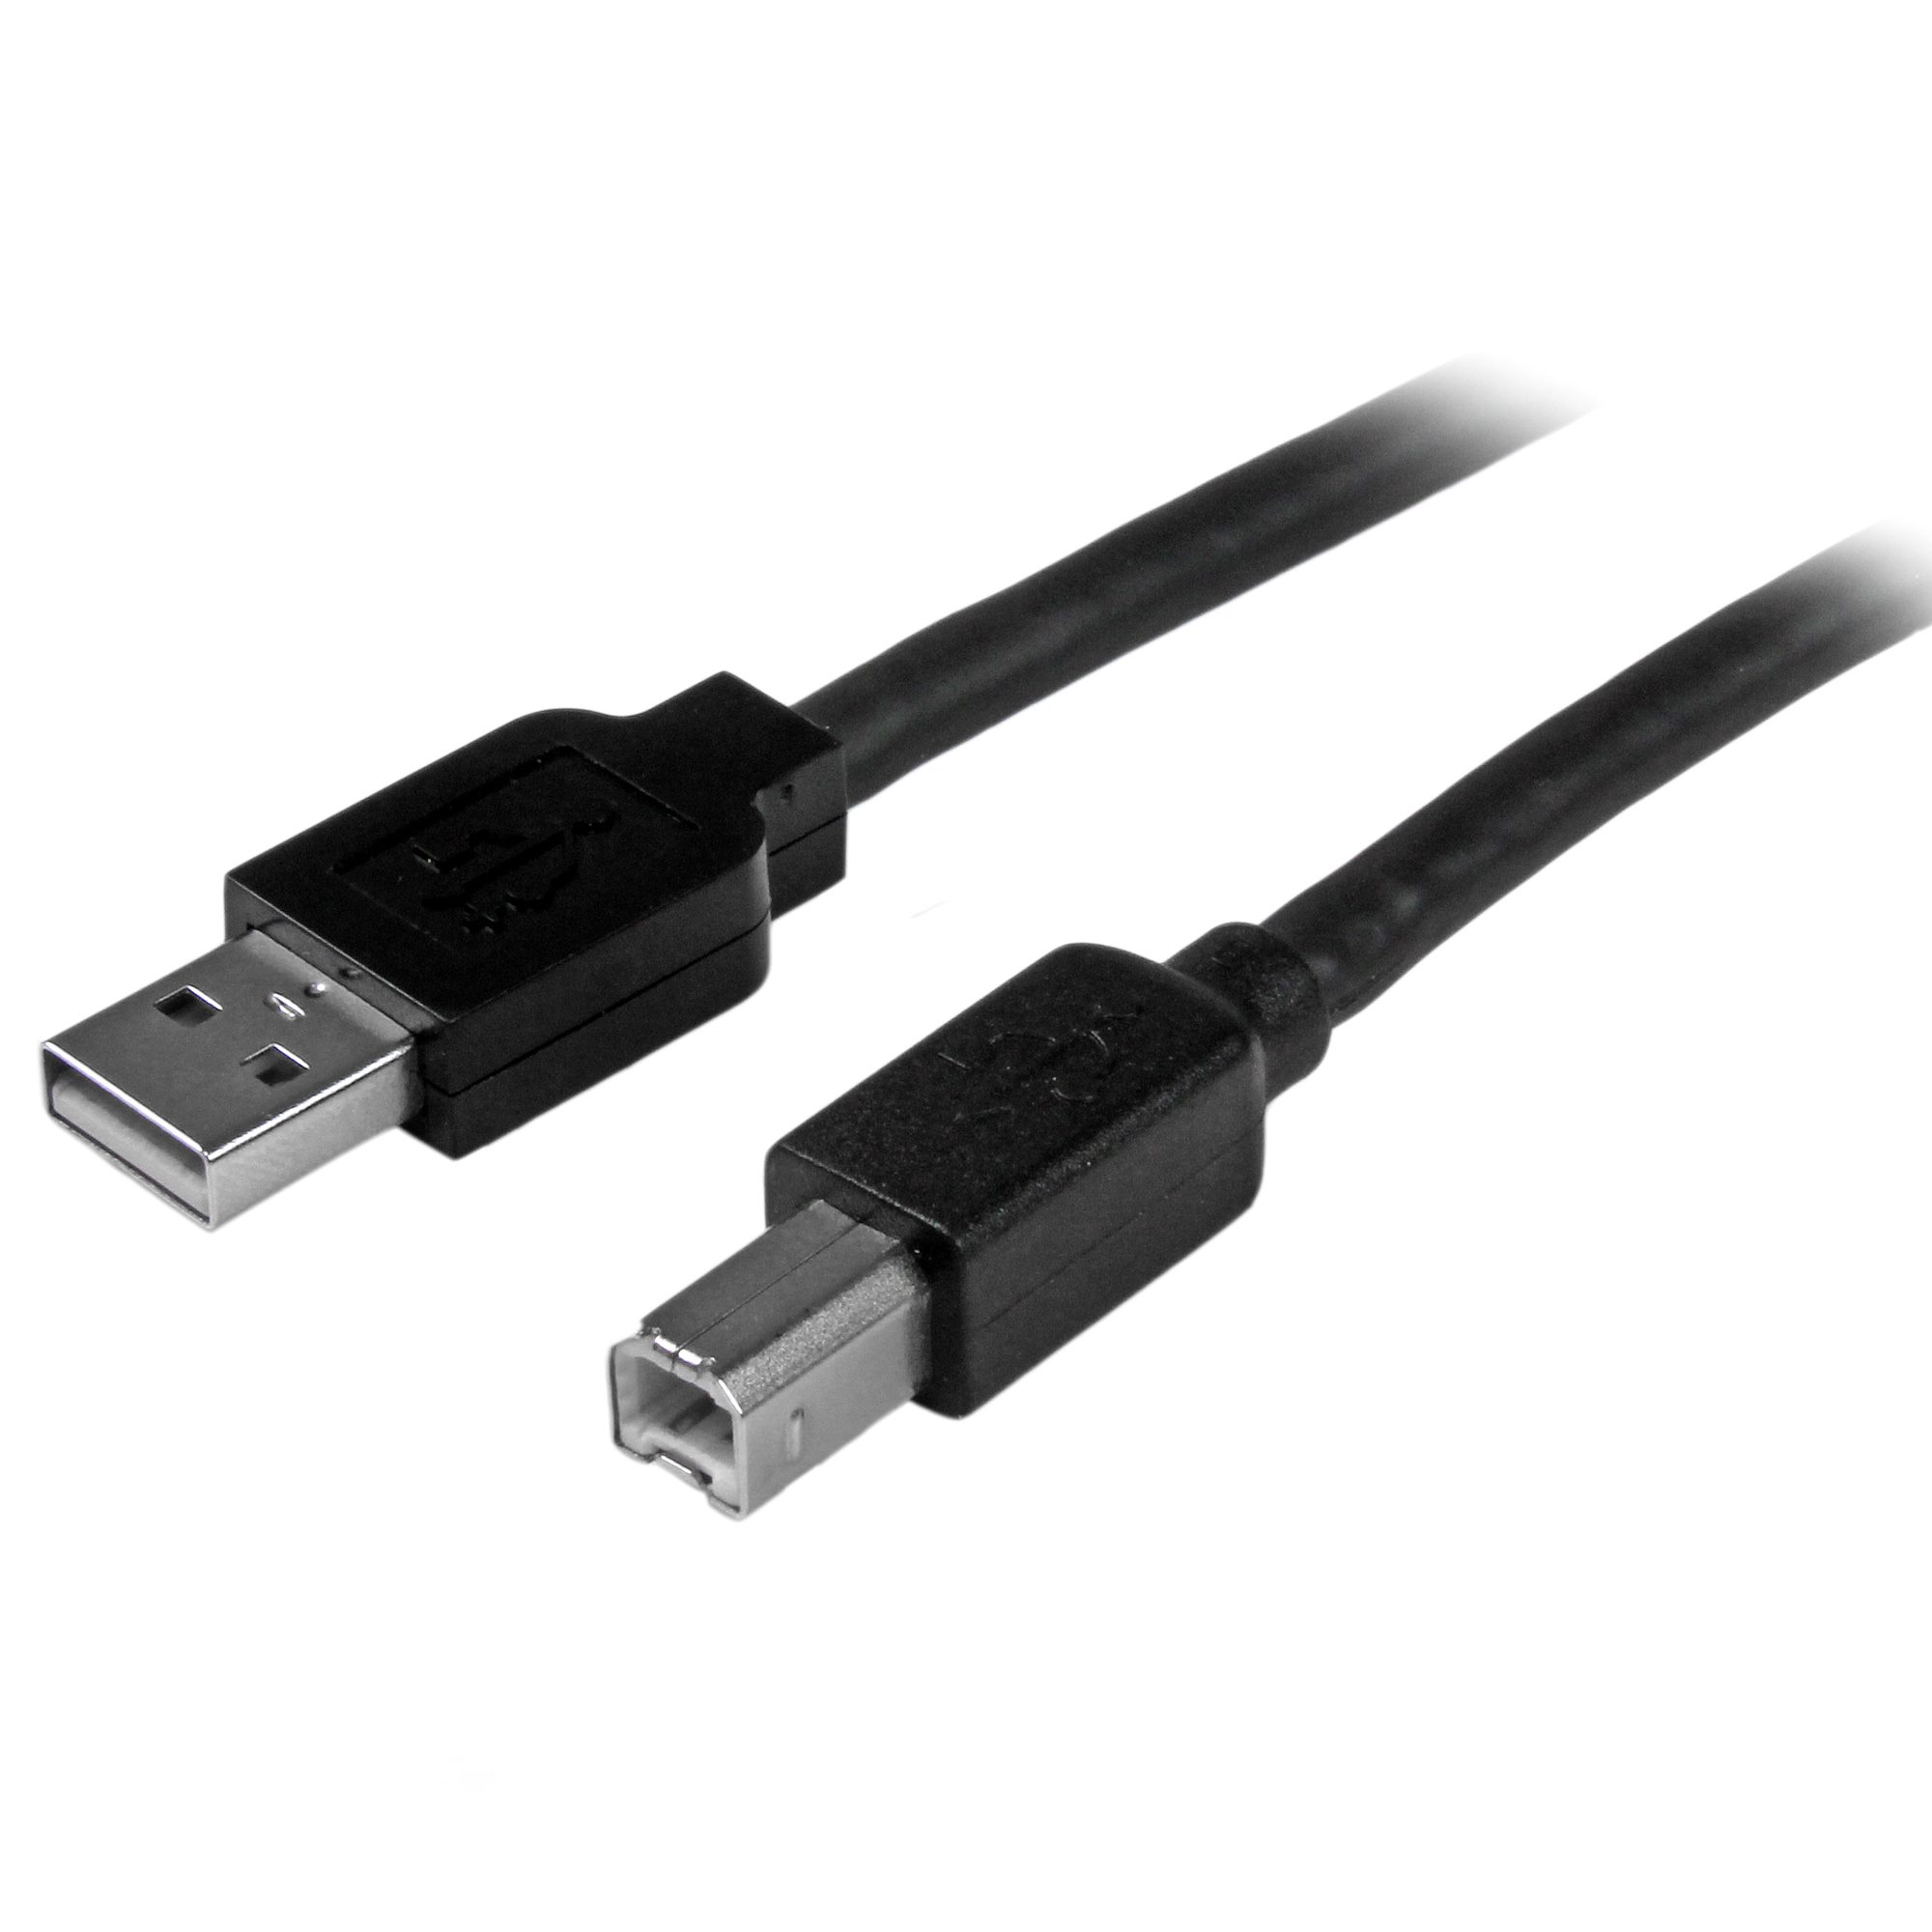 50ft USB 2.0 Extension & 10ft A Male/B Male Cable for Brother MFC-9800 Multifunction Printer